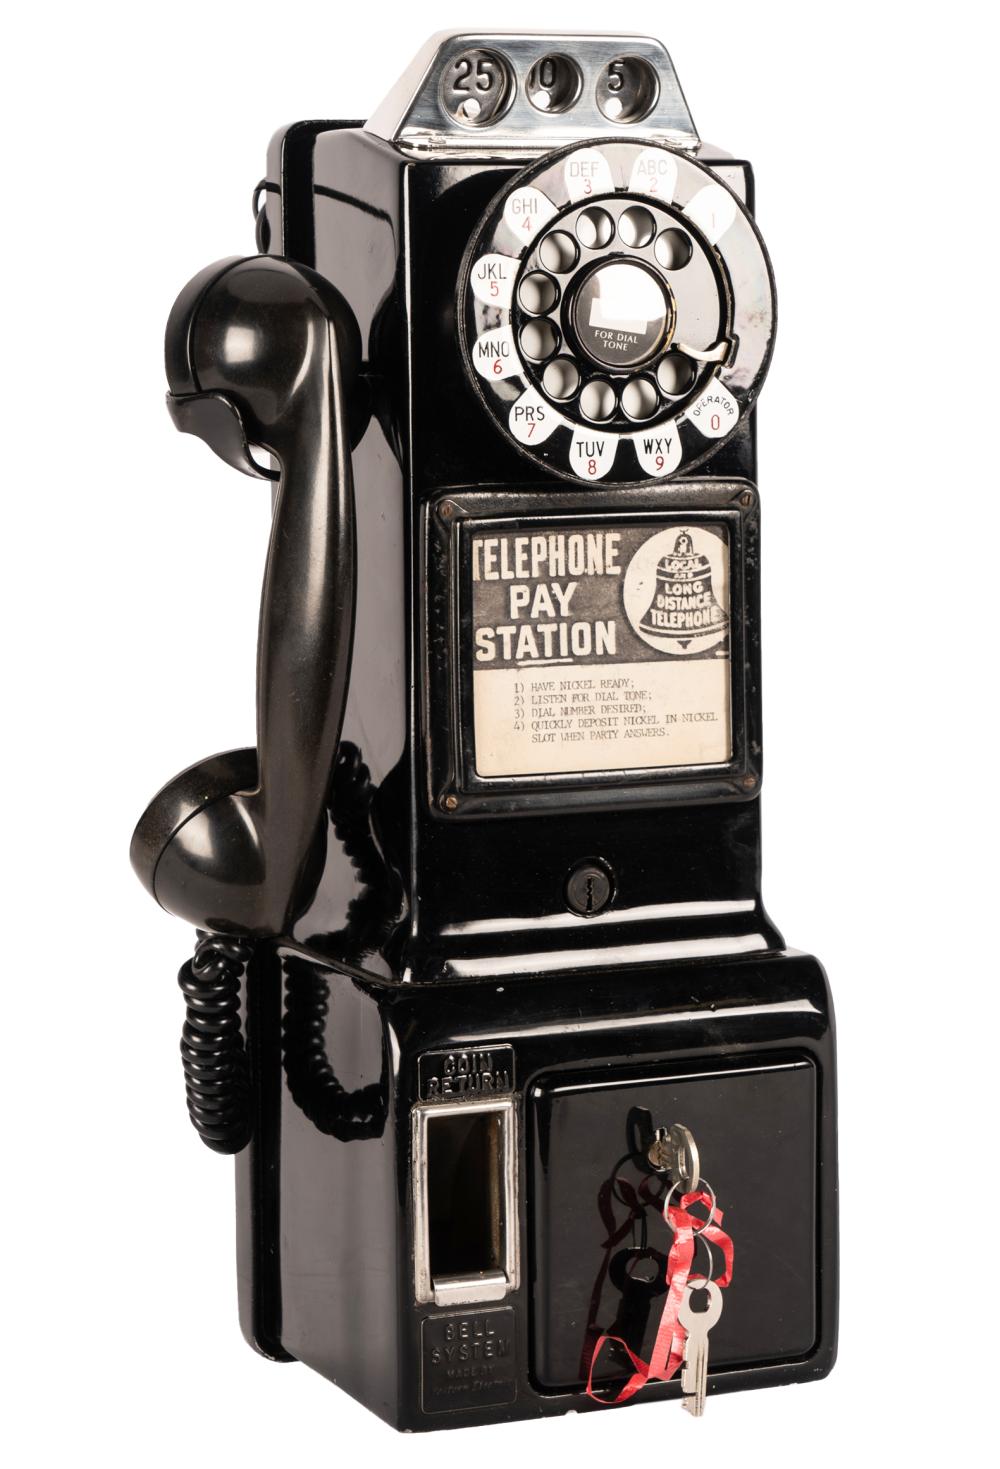 MODERN ELECTRIC PAY PHONEwith two